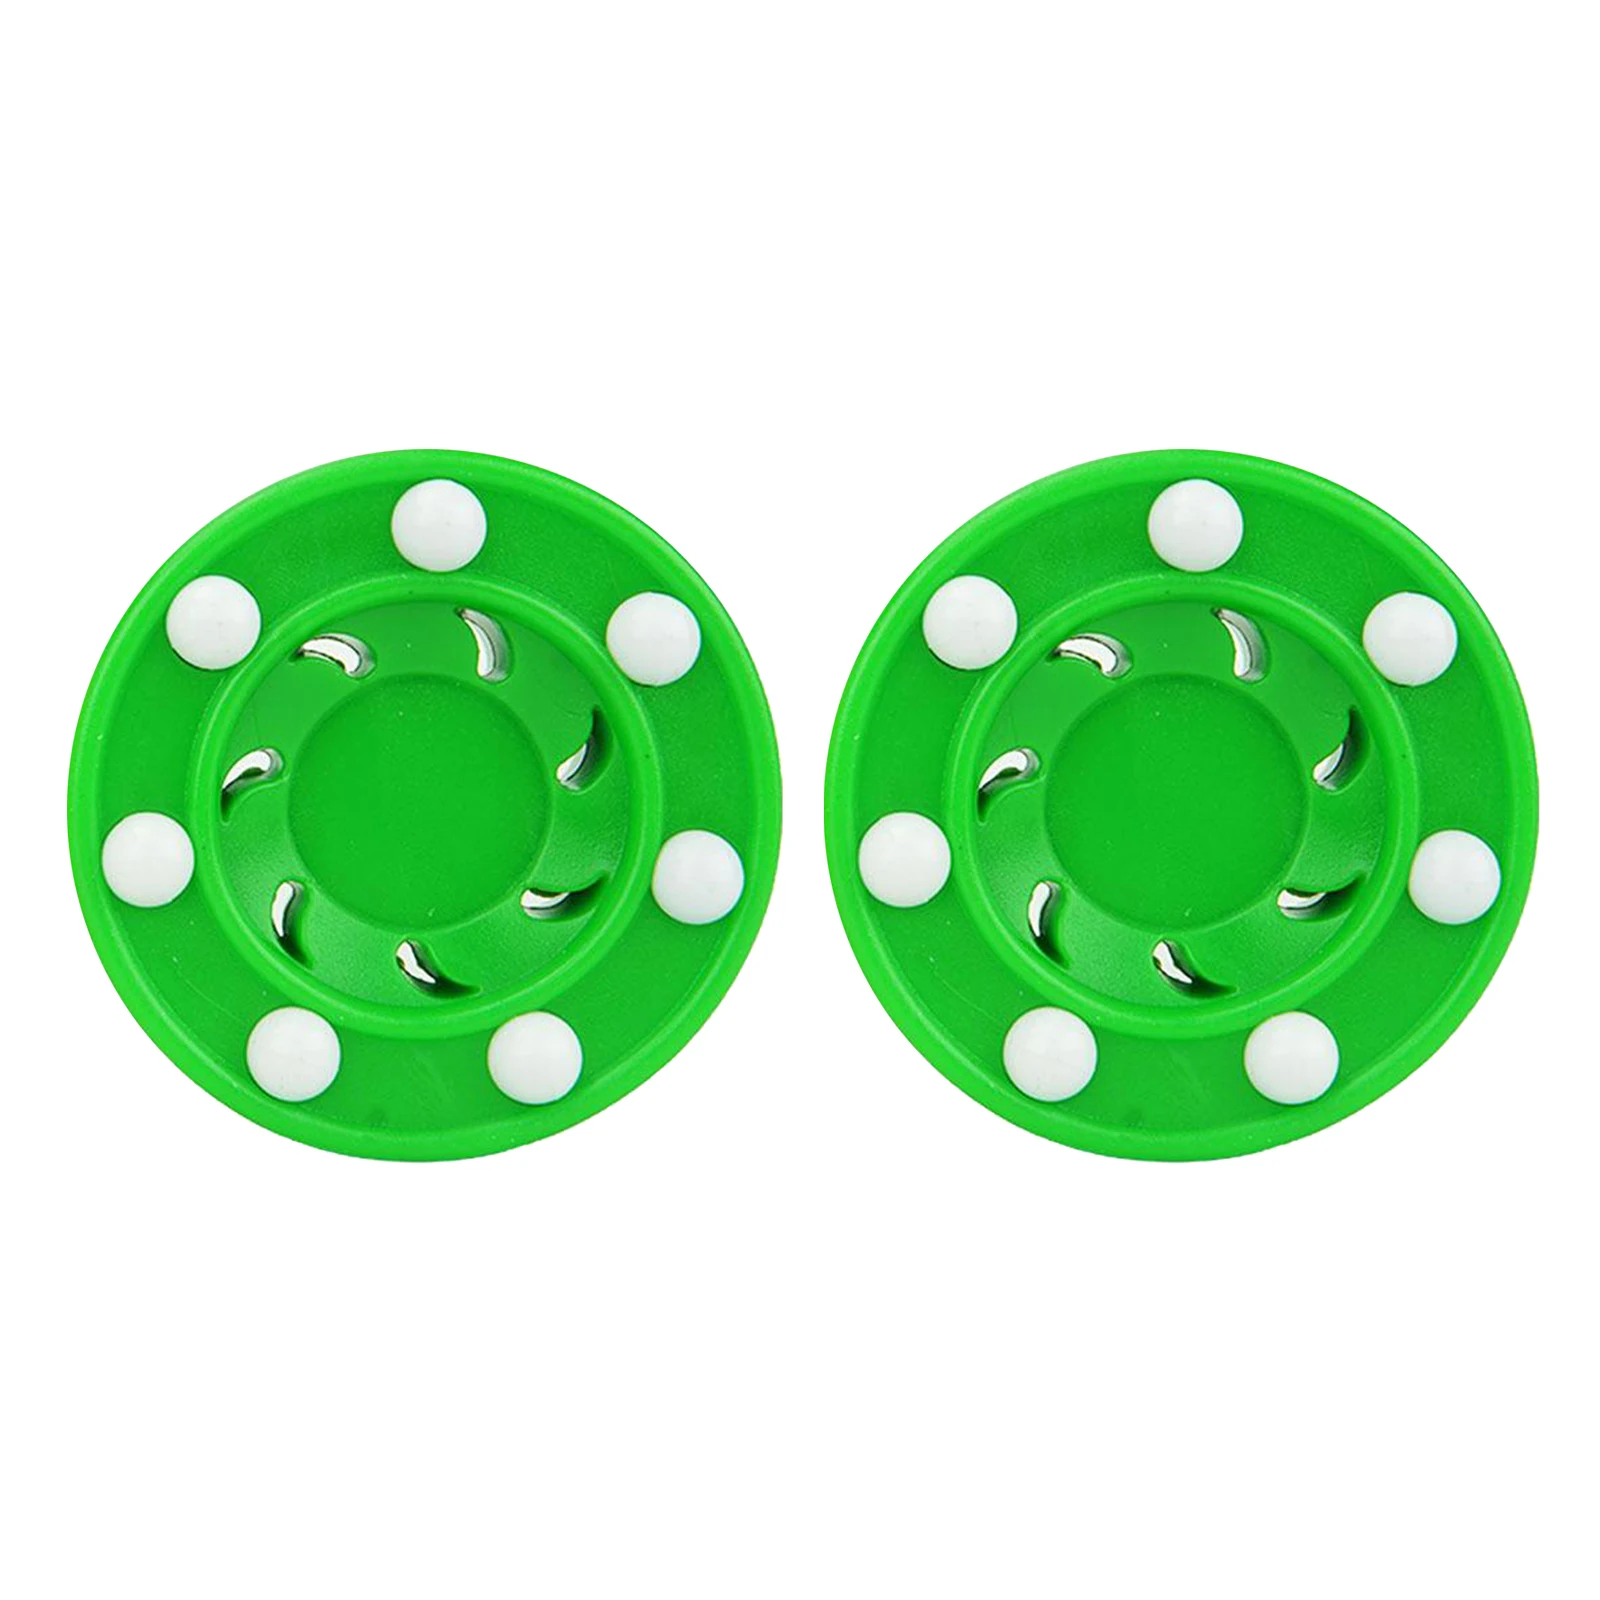 2x Roller Hockey Game Puck Pro Shot for Practicing and Classic Training Indoor